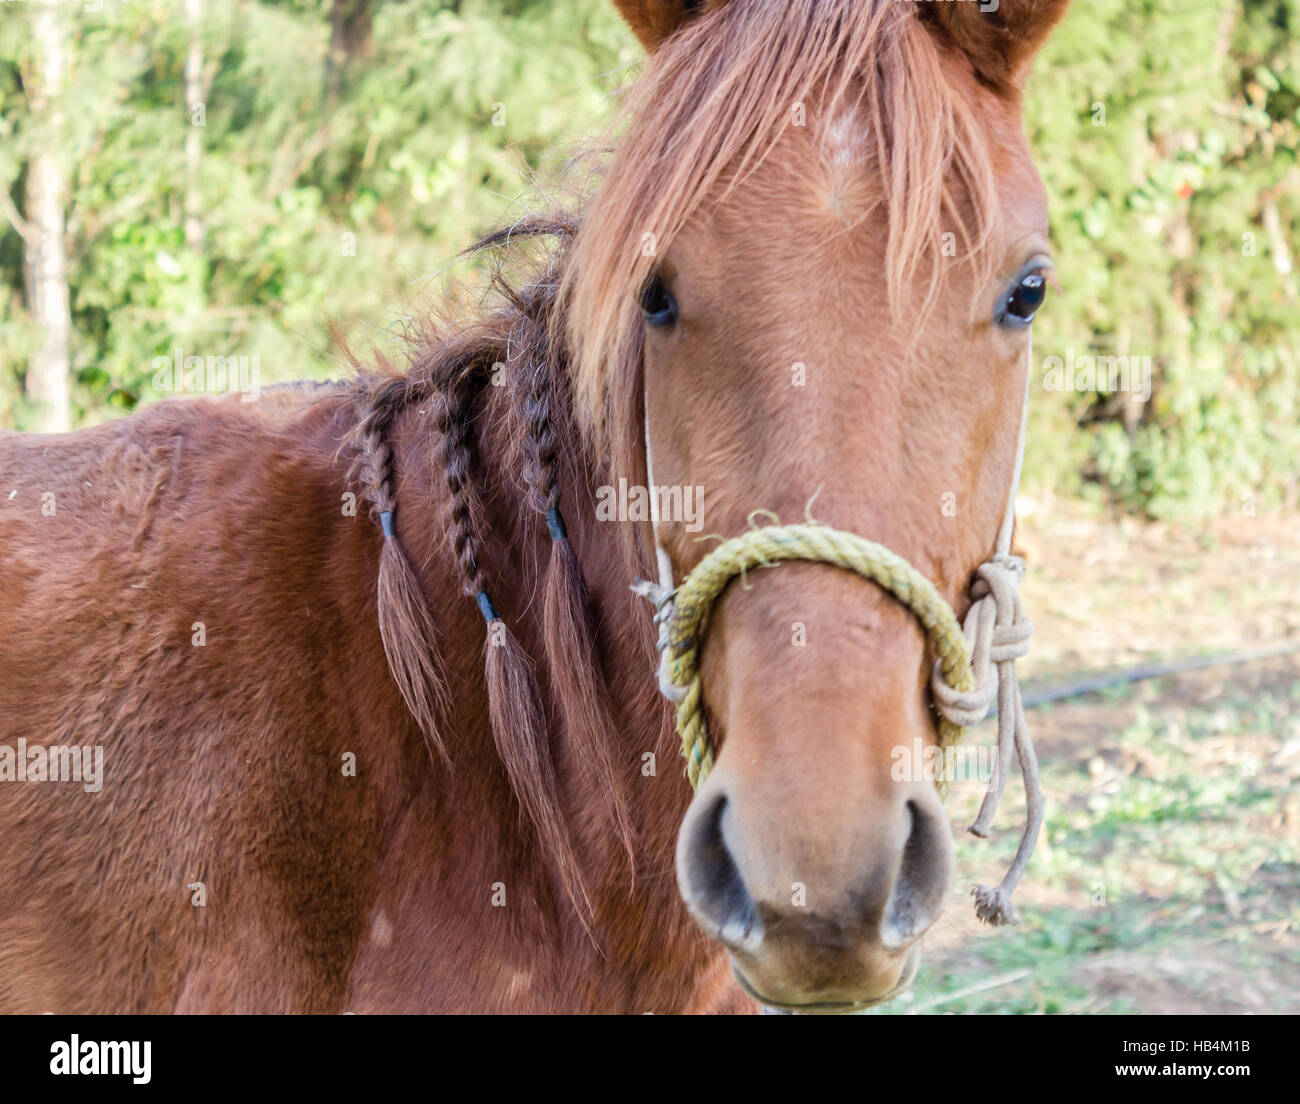 Horse with braids Stock Photo